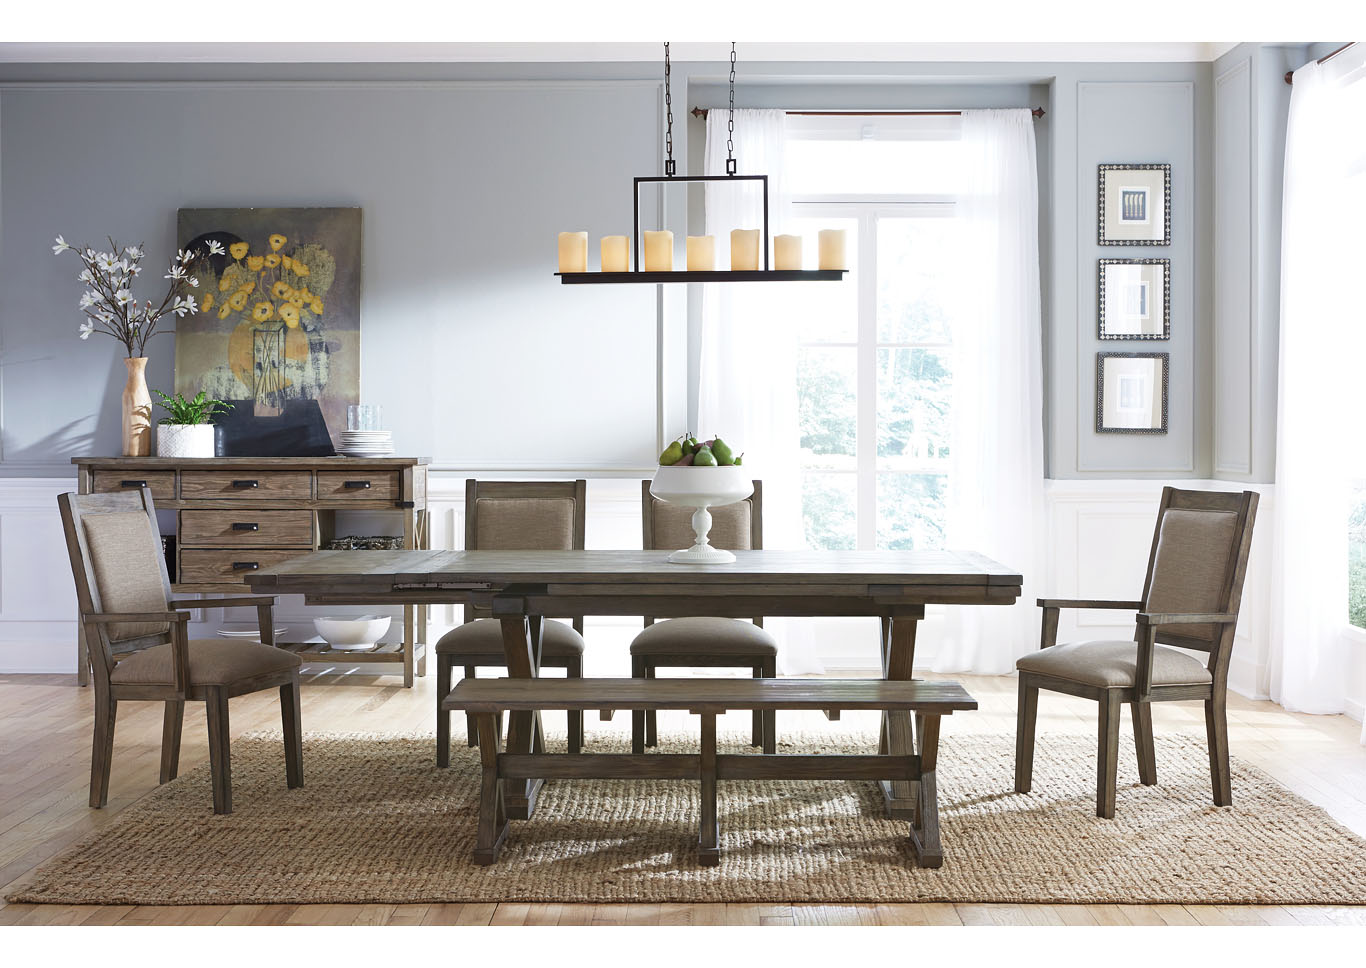 Foundry Driftwood Dining Set w/2 Upholstered Side Chairs, 2 Upholstered Arm Chairs & Bench,Kincaid